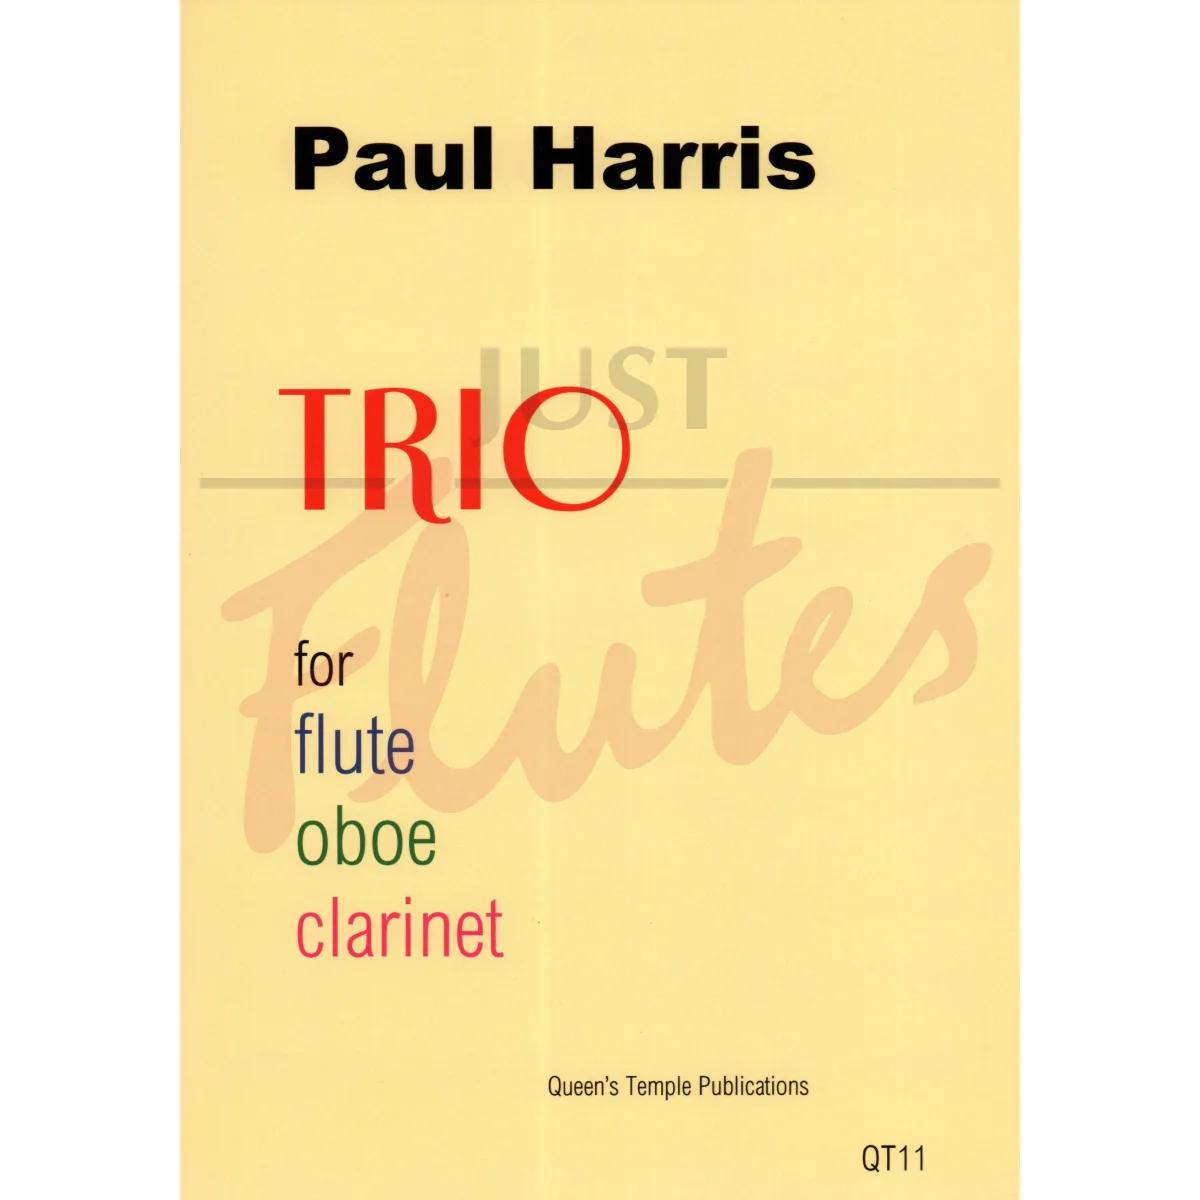 Trio for Flute, Oboe and Clarinet